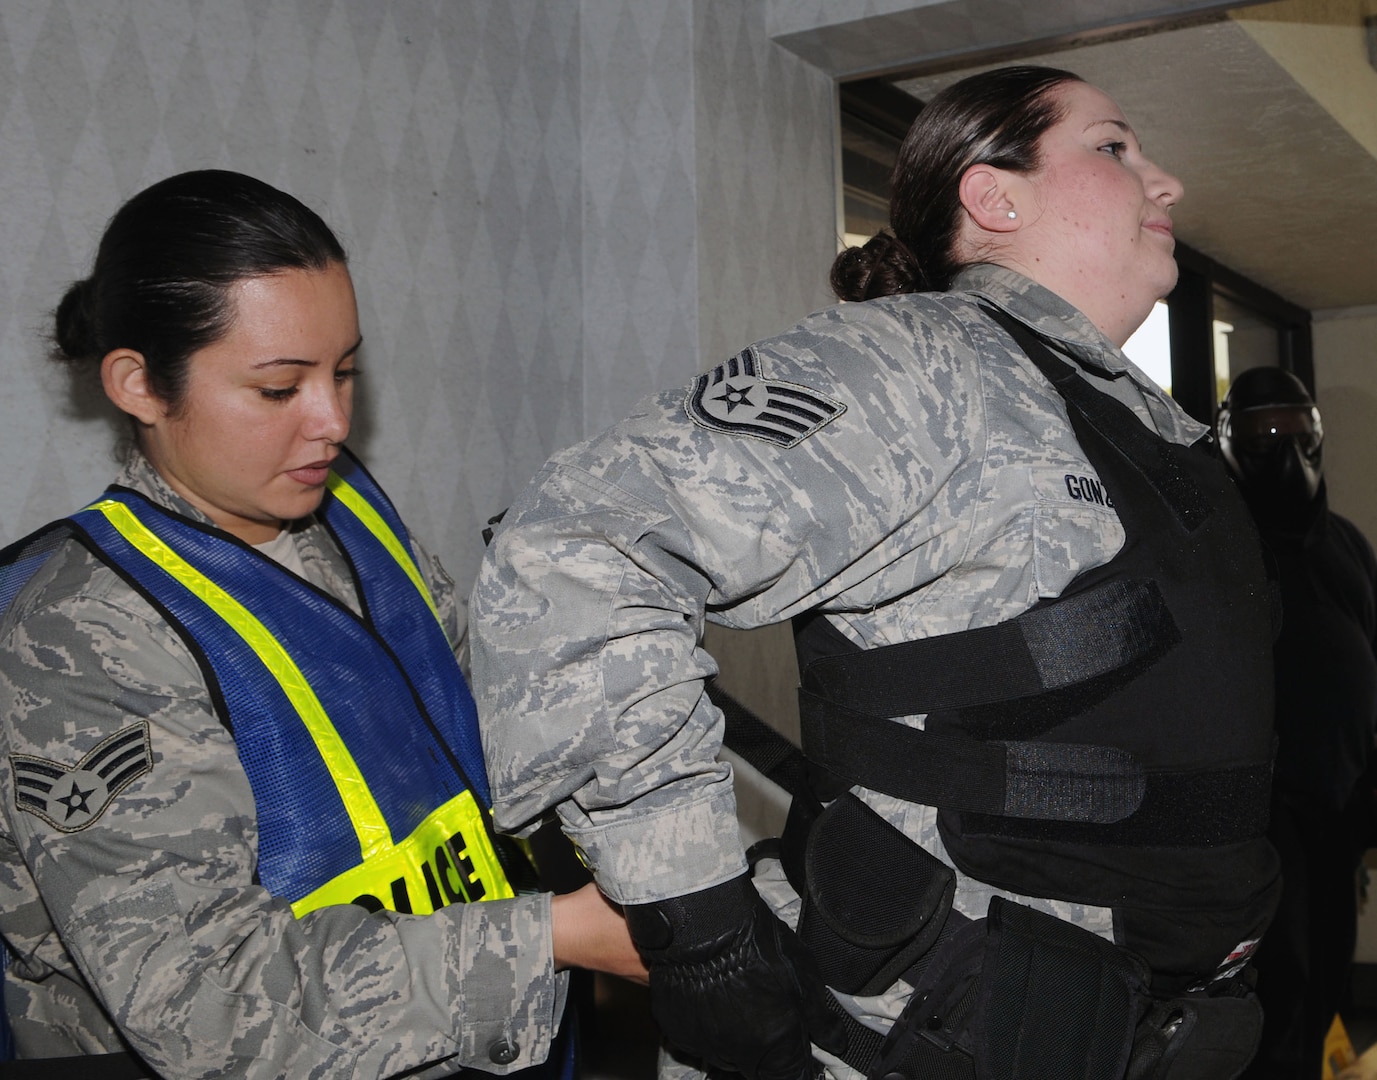 Staff Sgt. Marisela Gonzales, right, of the 902nd Security Forces Squadron at Randolph Air Force Base gets assistance from Senior Airman Mida Dekzeypros to adjust her vest and safety gear before entering the old Randolph BX facility during Active Shooter Training March 24, 2010.  (U.S. Air Force photo by Don Lindsey)